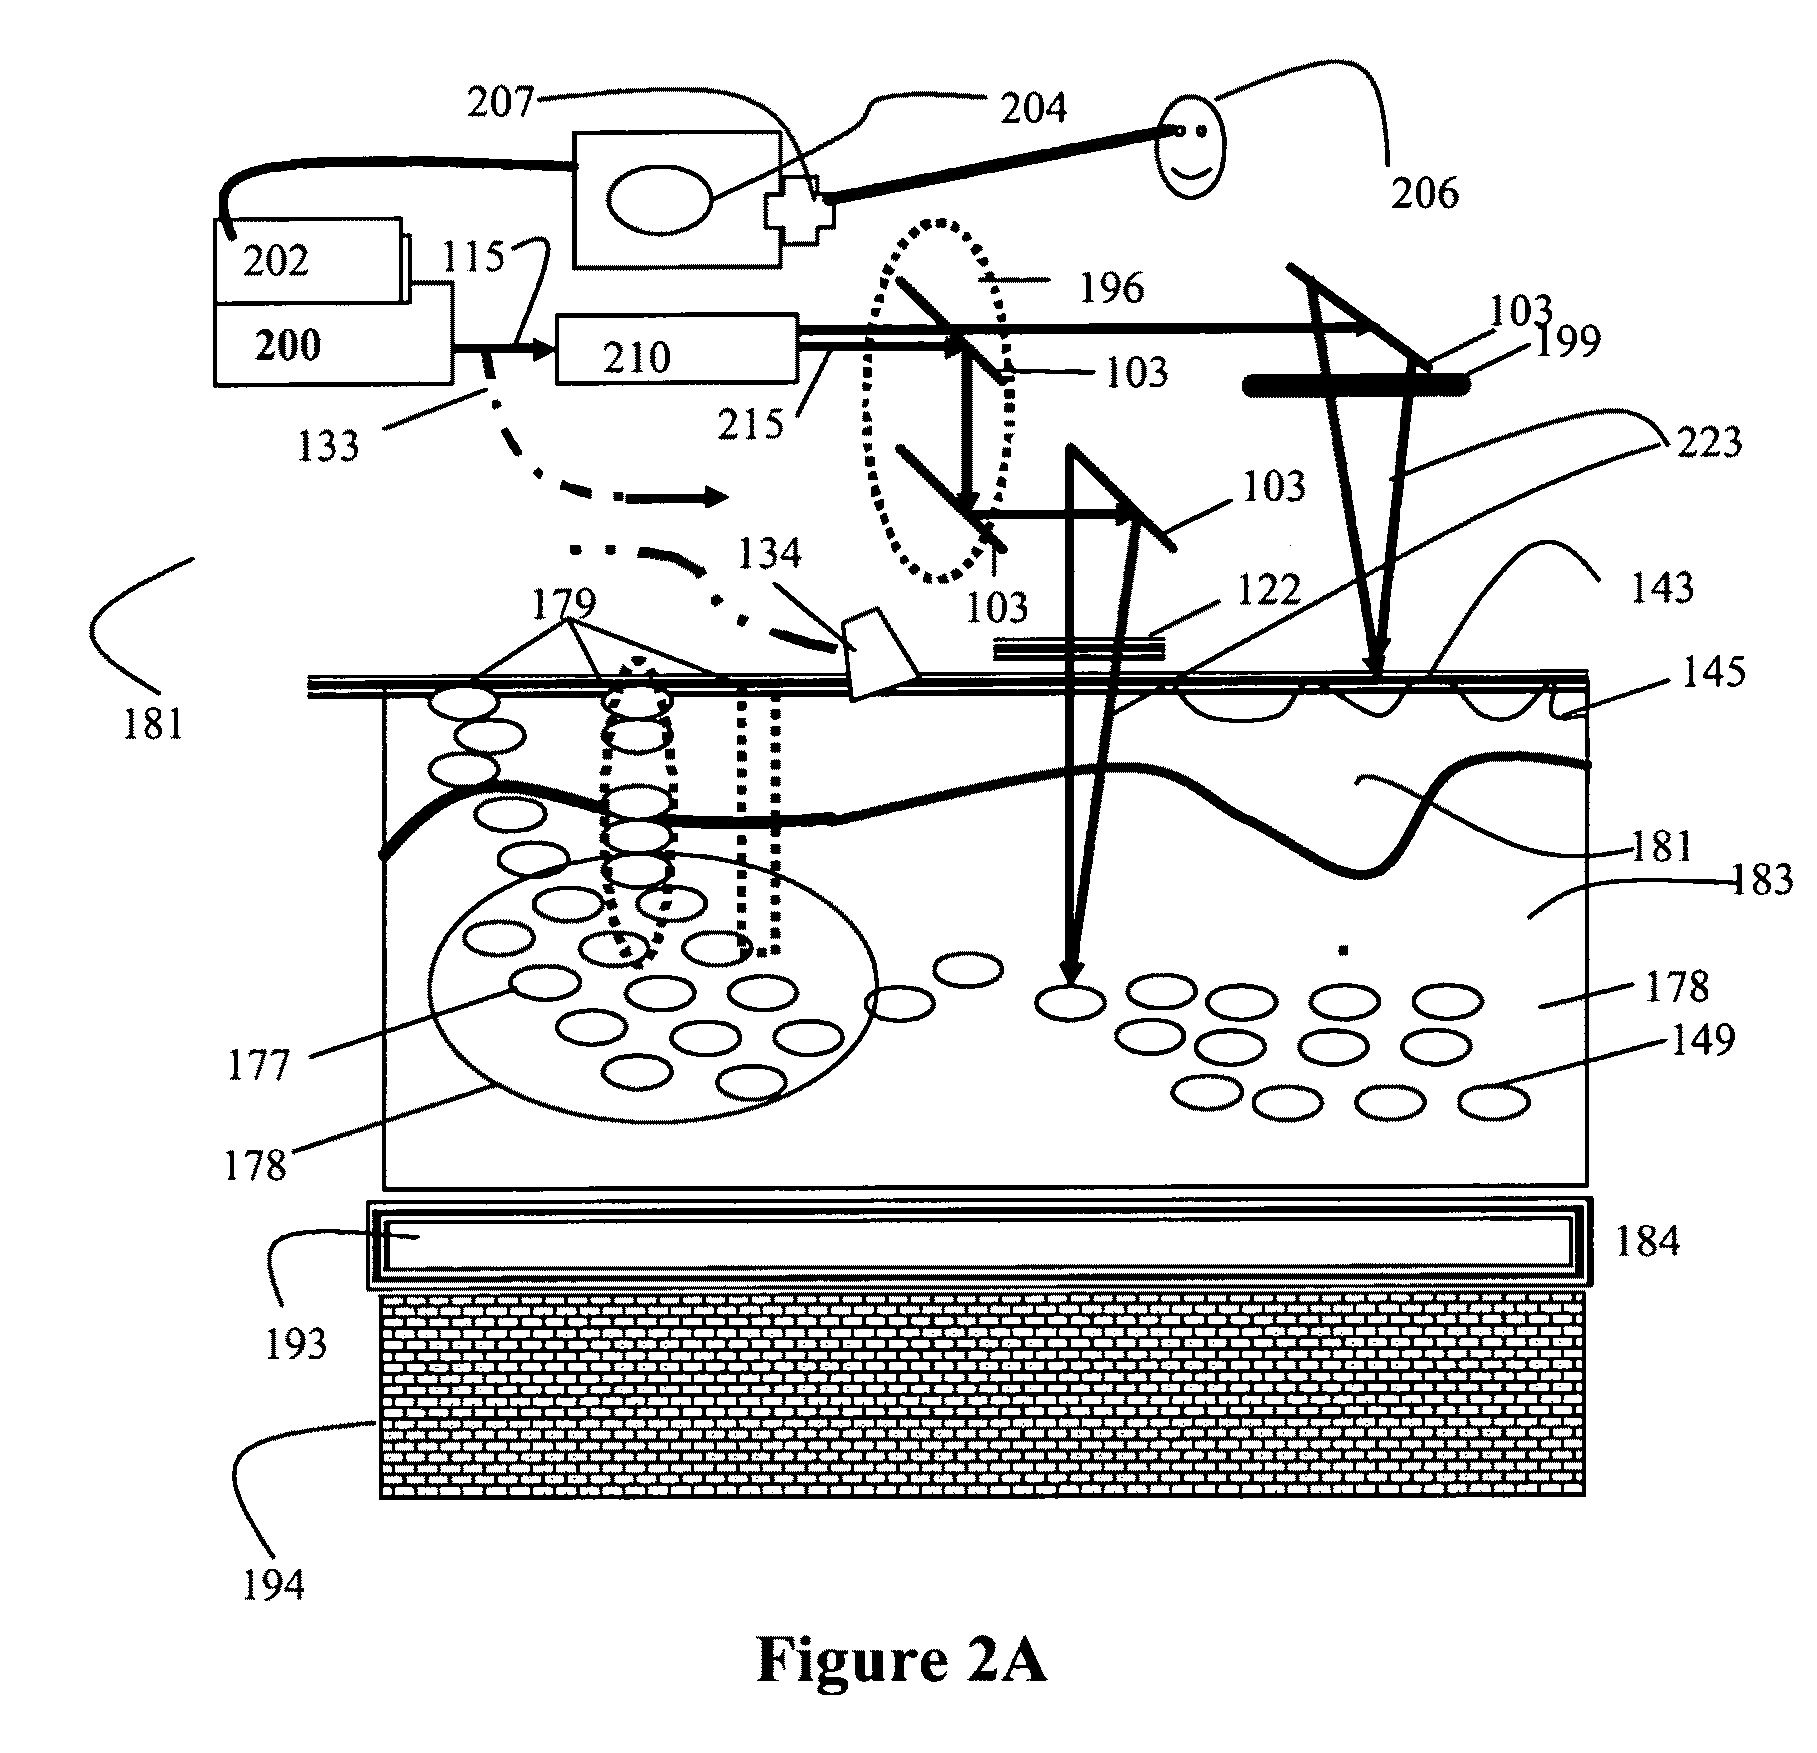 Devices and methods for generation of subsurface microdisruptions for biomedical applications